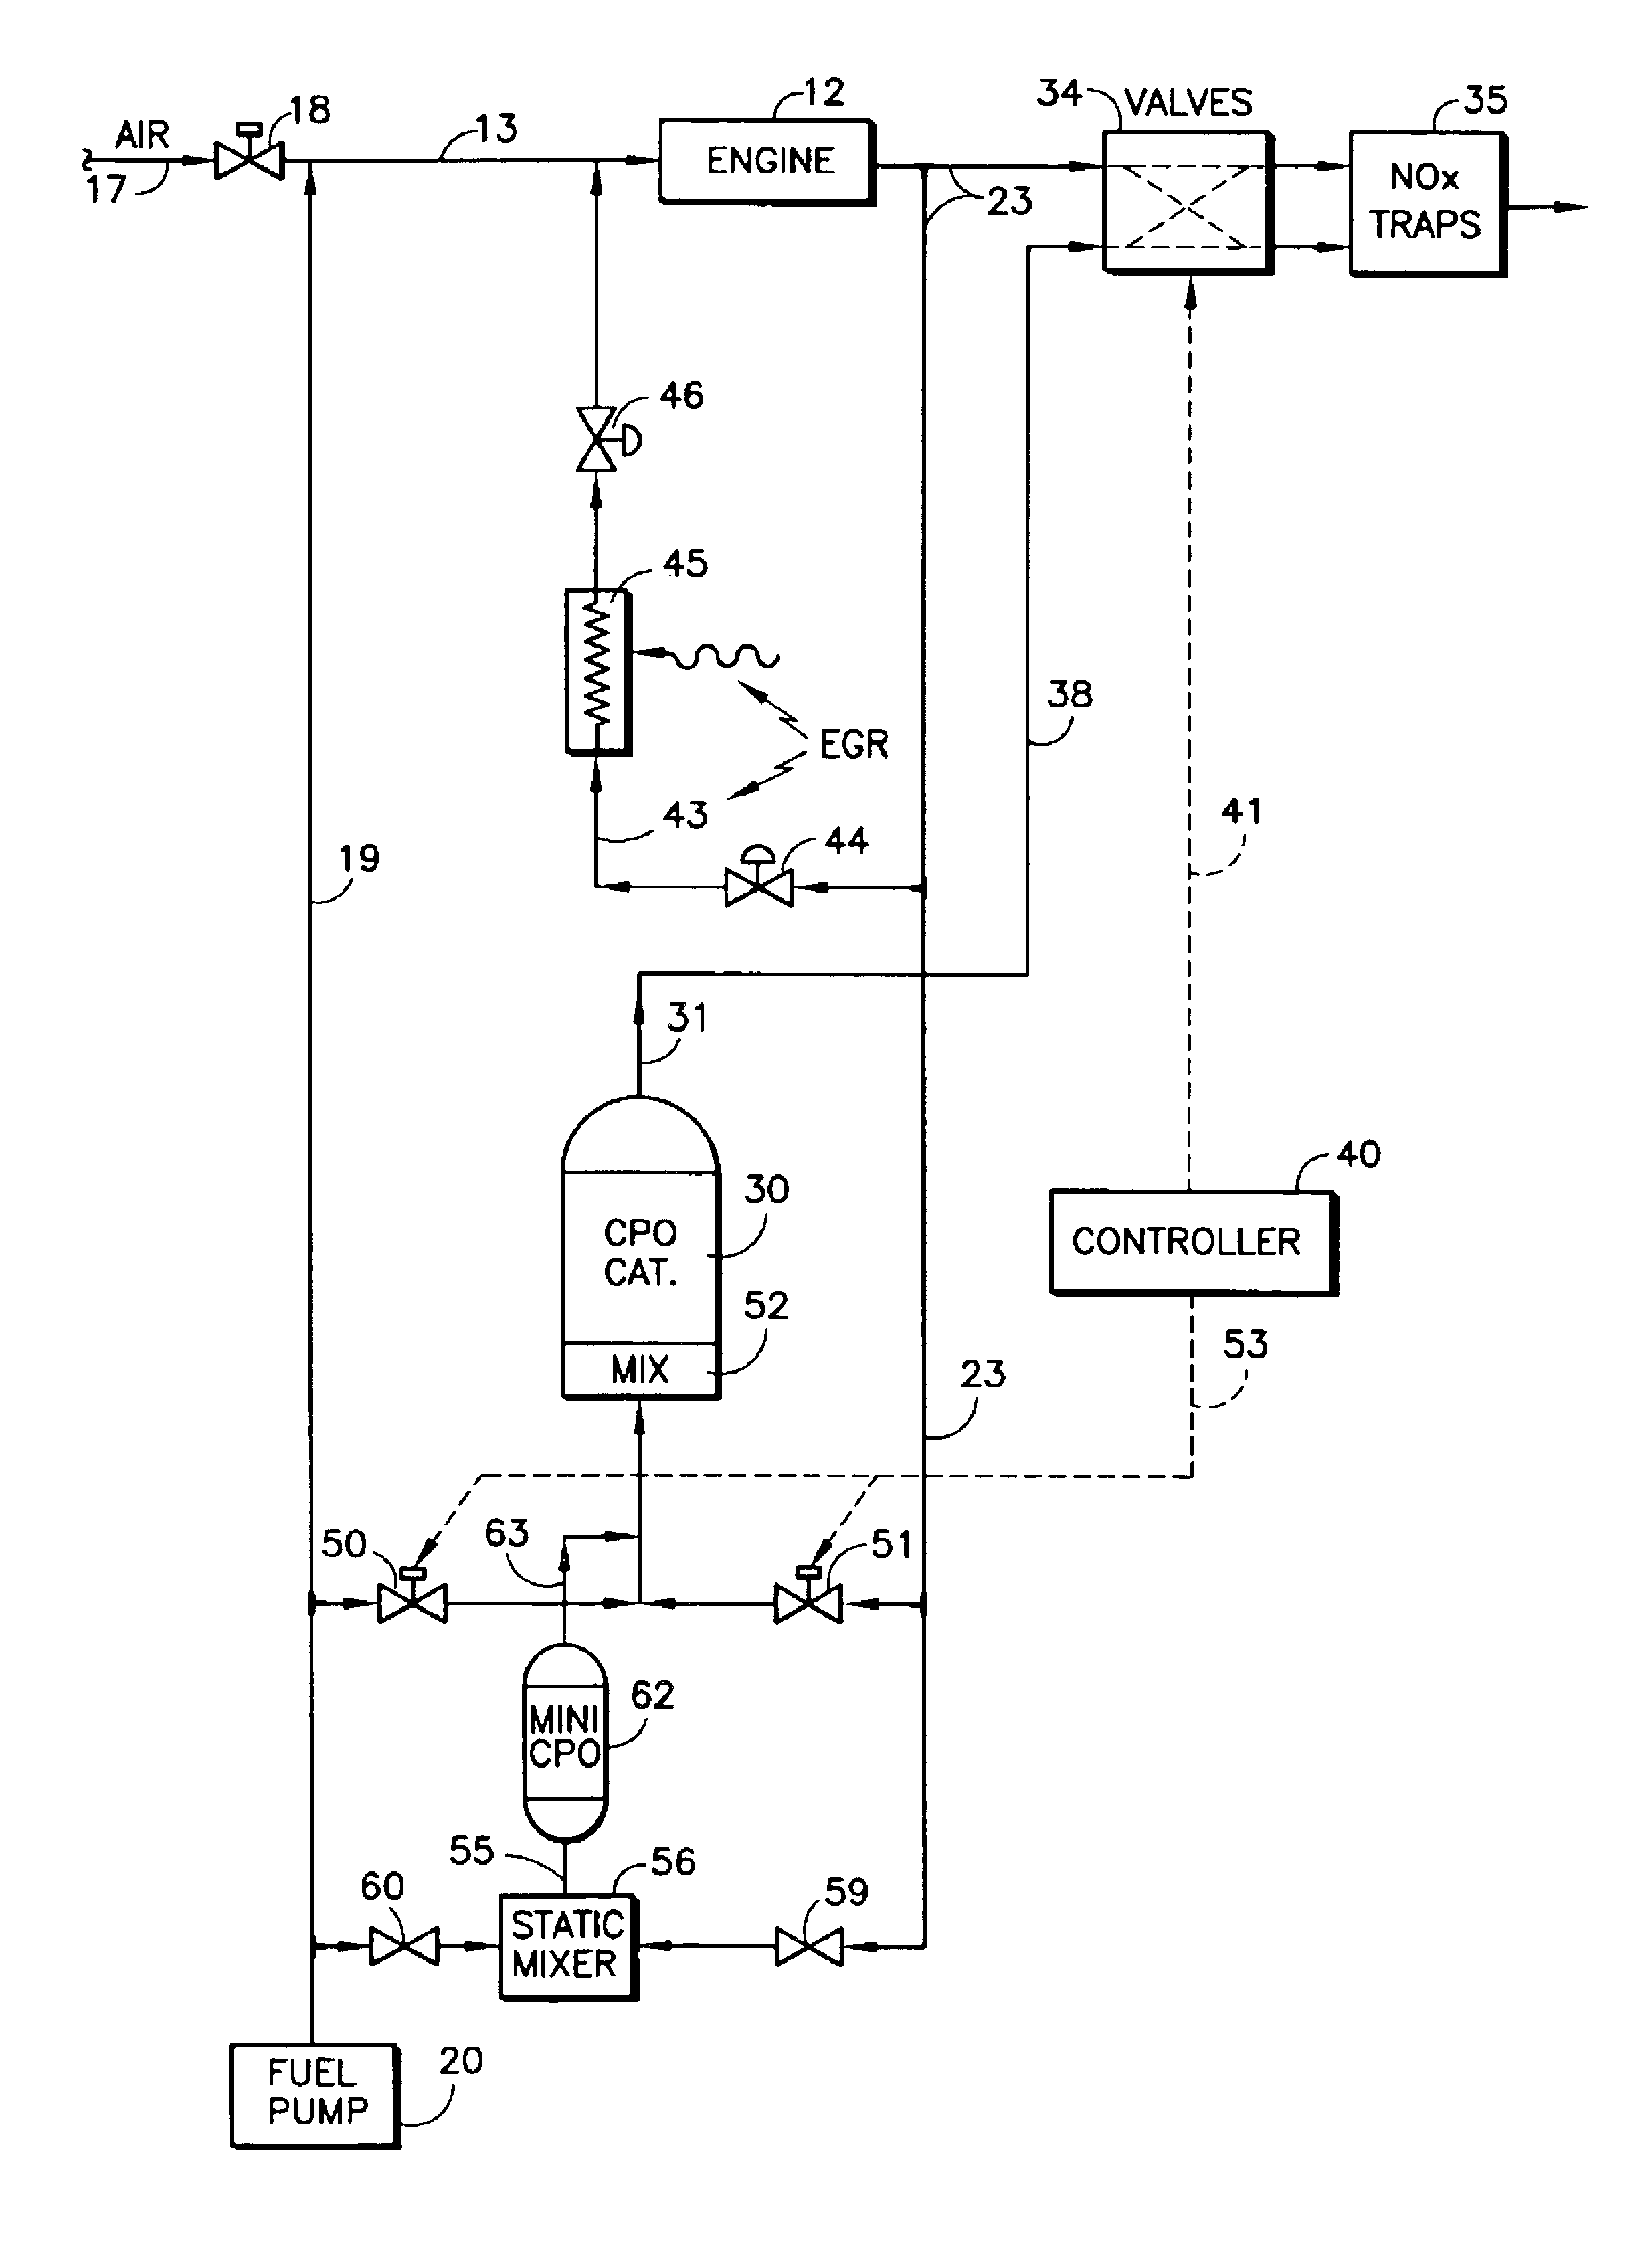 Intermittent application of syngas to NOx trap and/or diesel engine